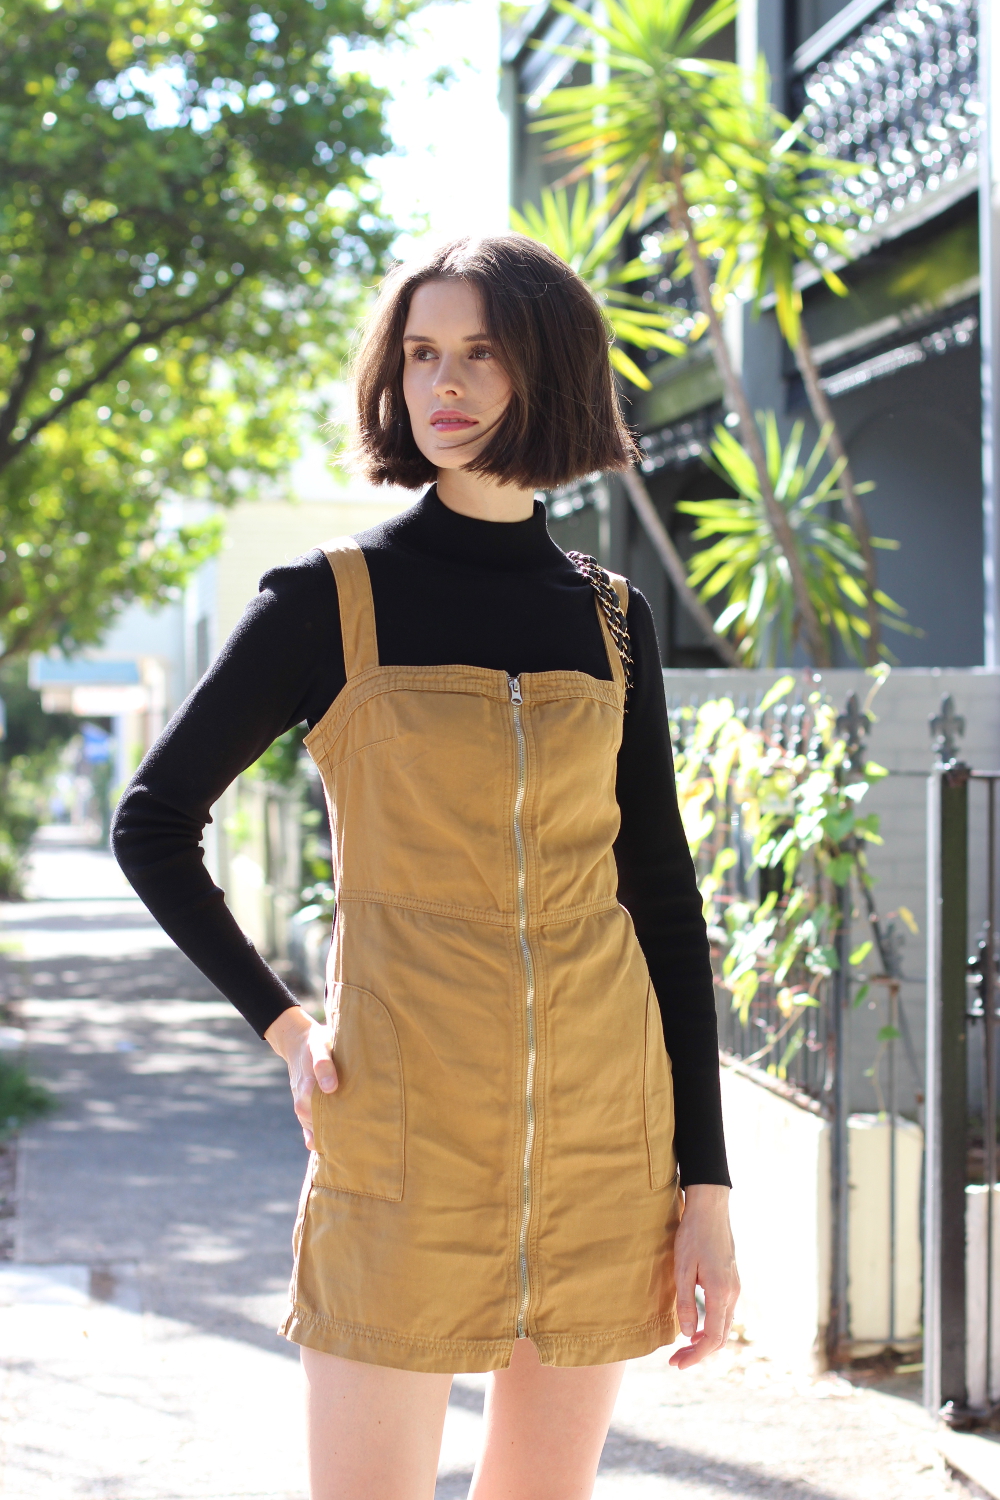 BY CHILL BLOG | Chloe Hill wears topshop khaki utility dress and cue clothing black skivvy knit top on the streets of Sydney